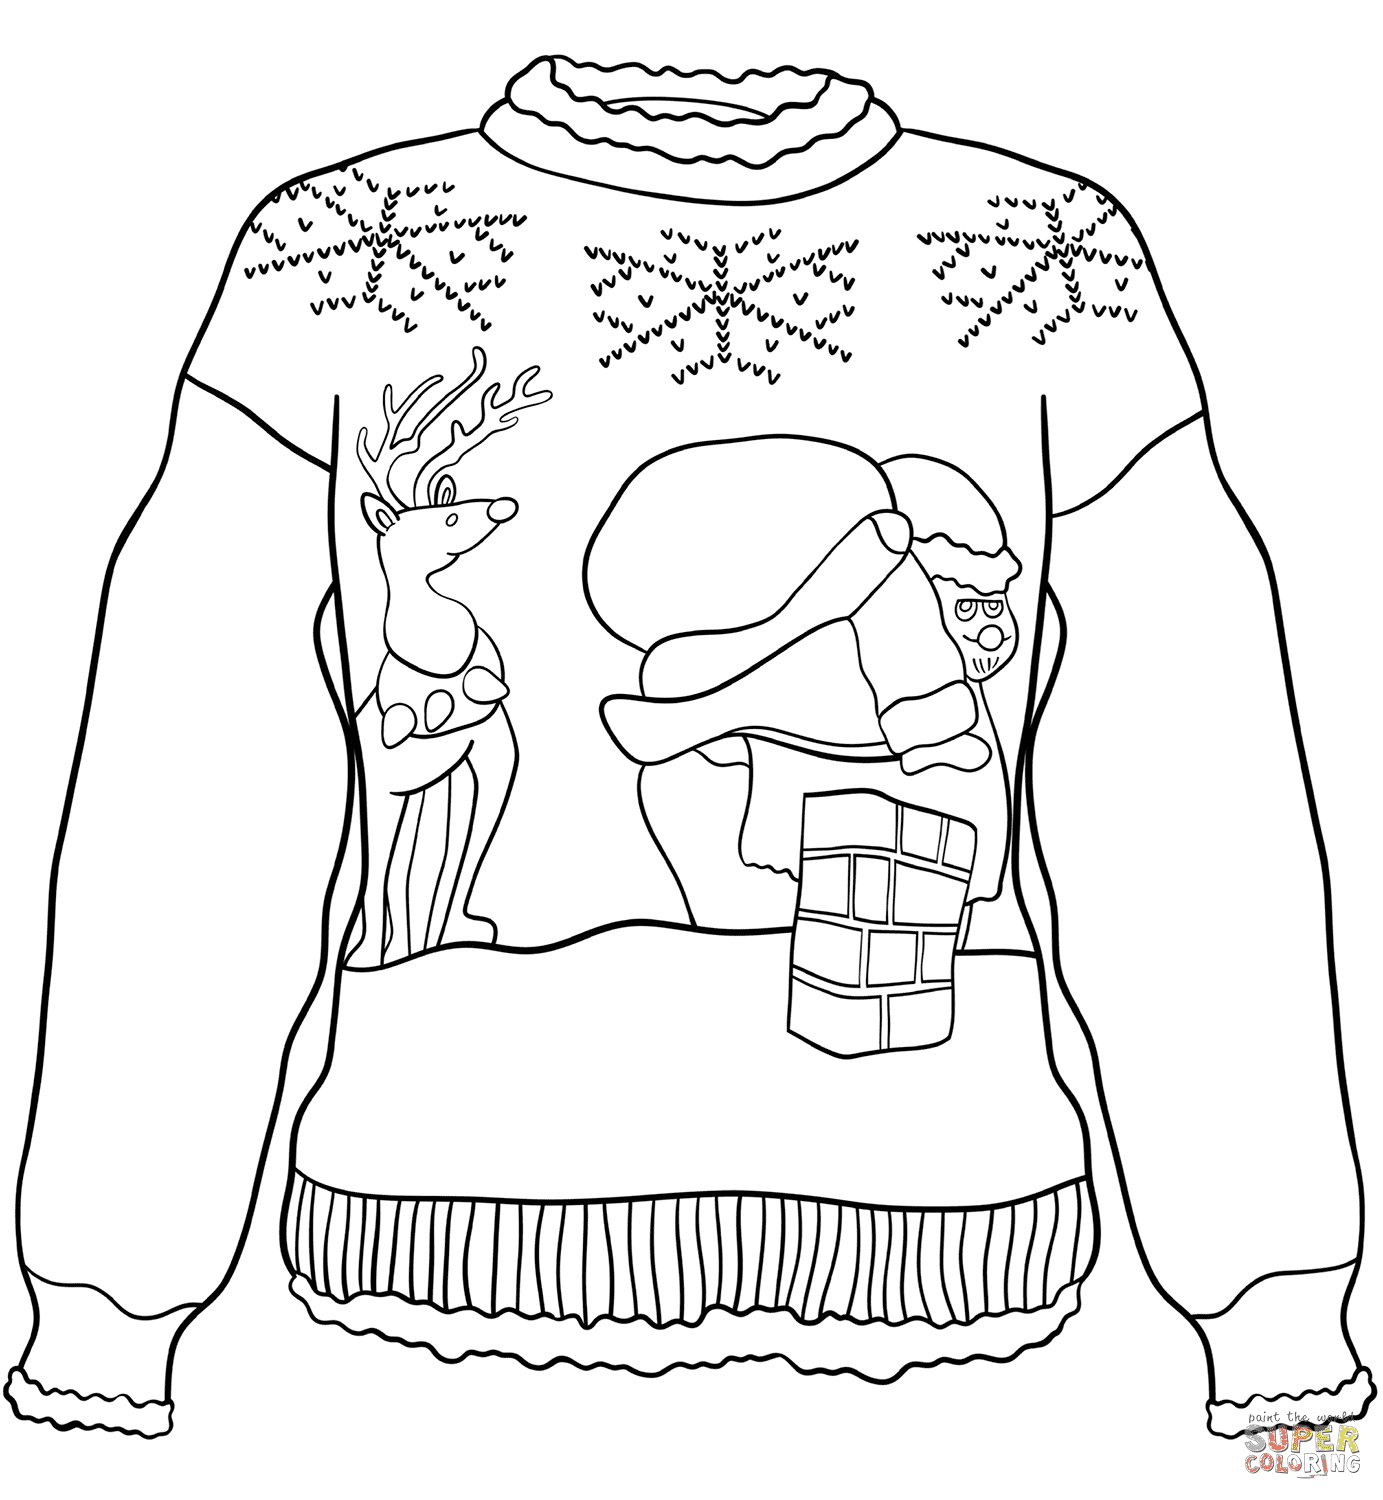 Christmas Sweater Coloring Pages Printable for Free Download